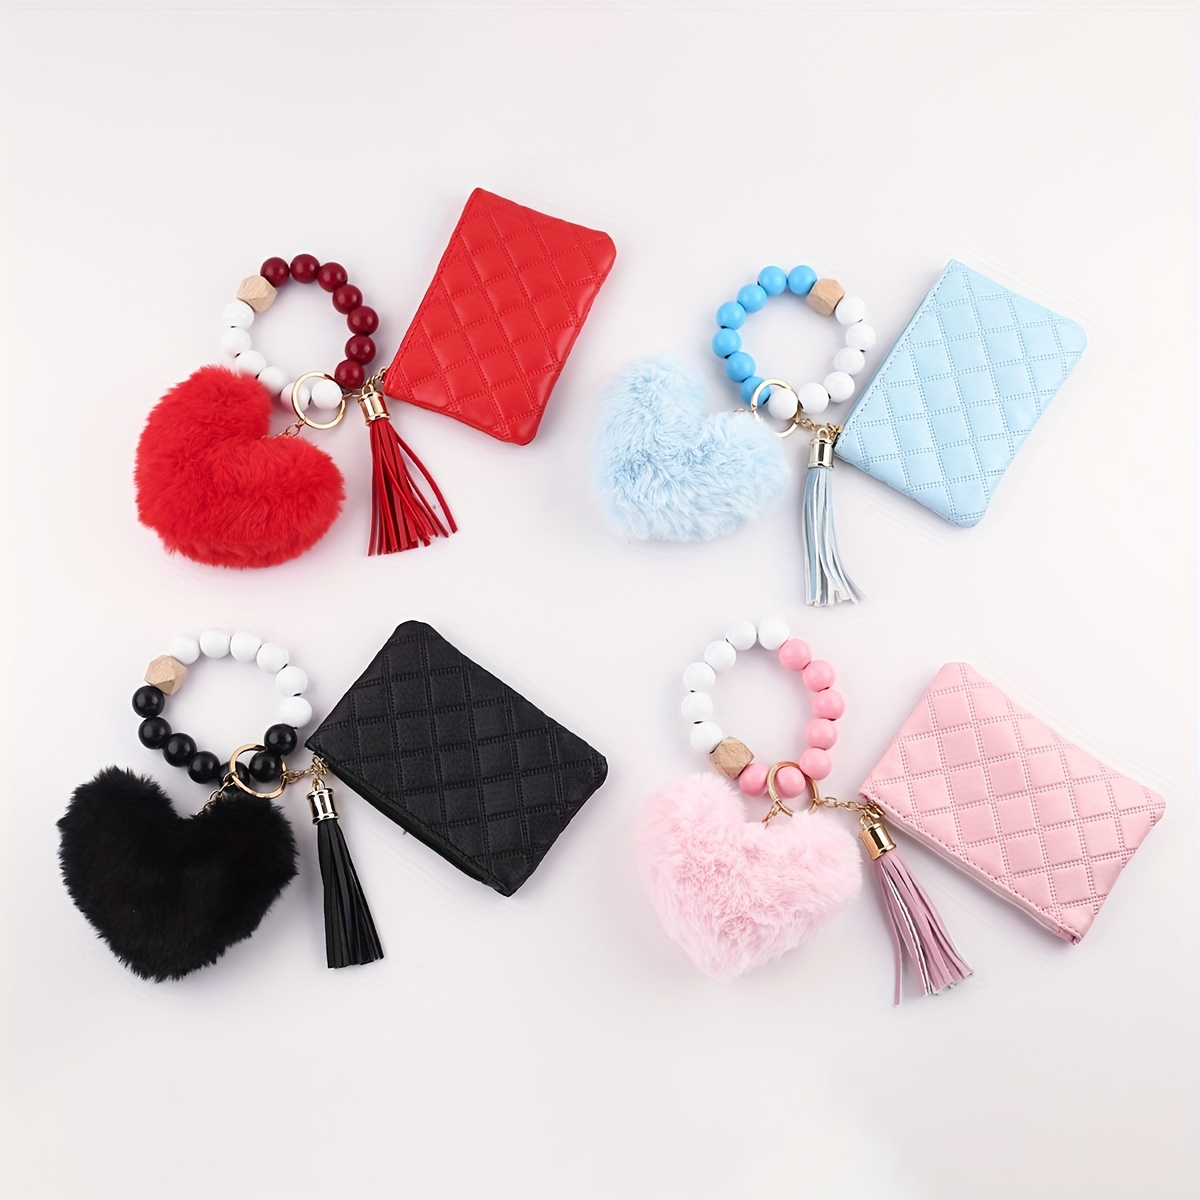 

Cute Pom Pom Beaded Bracelet Wristlet Keychain With Wallet Card Holder Bag Charm Phone Lanyard Earbud Case Cover Accessories Women Female Gift